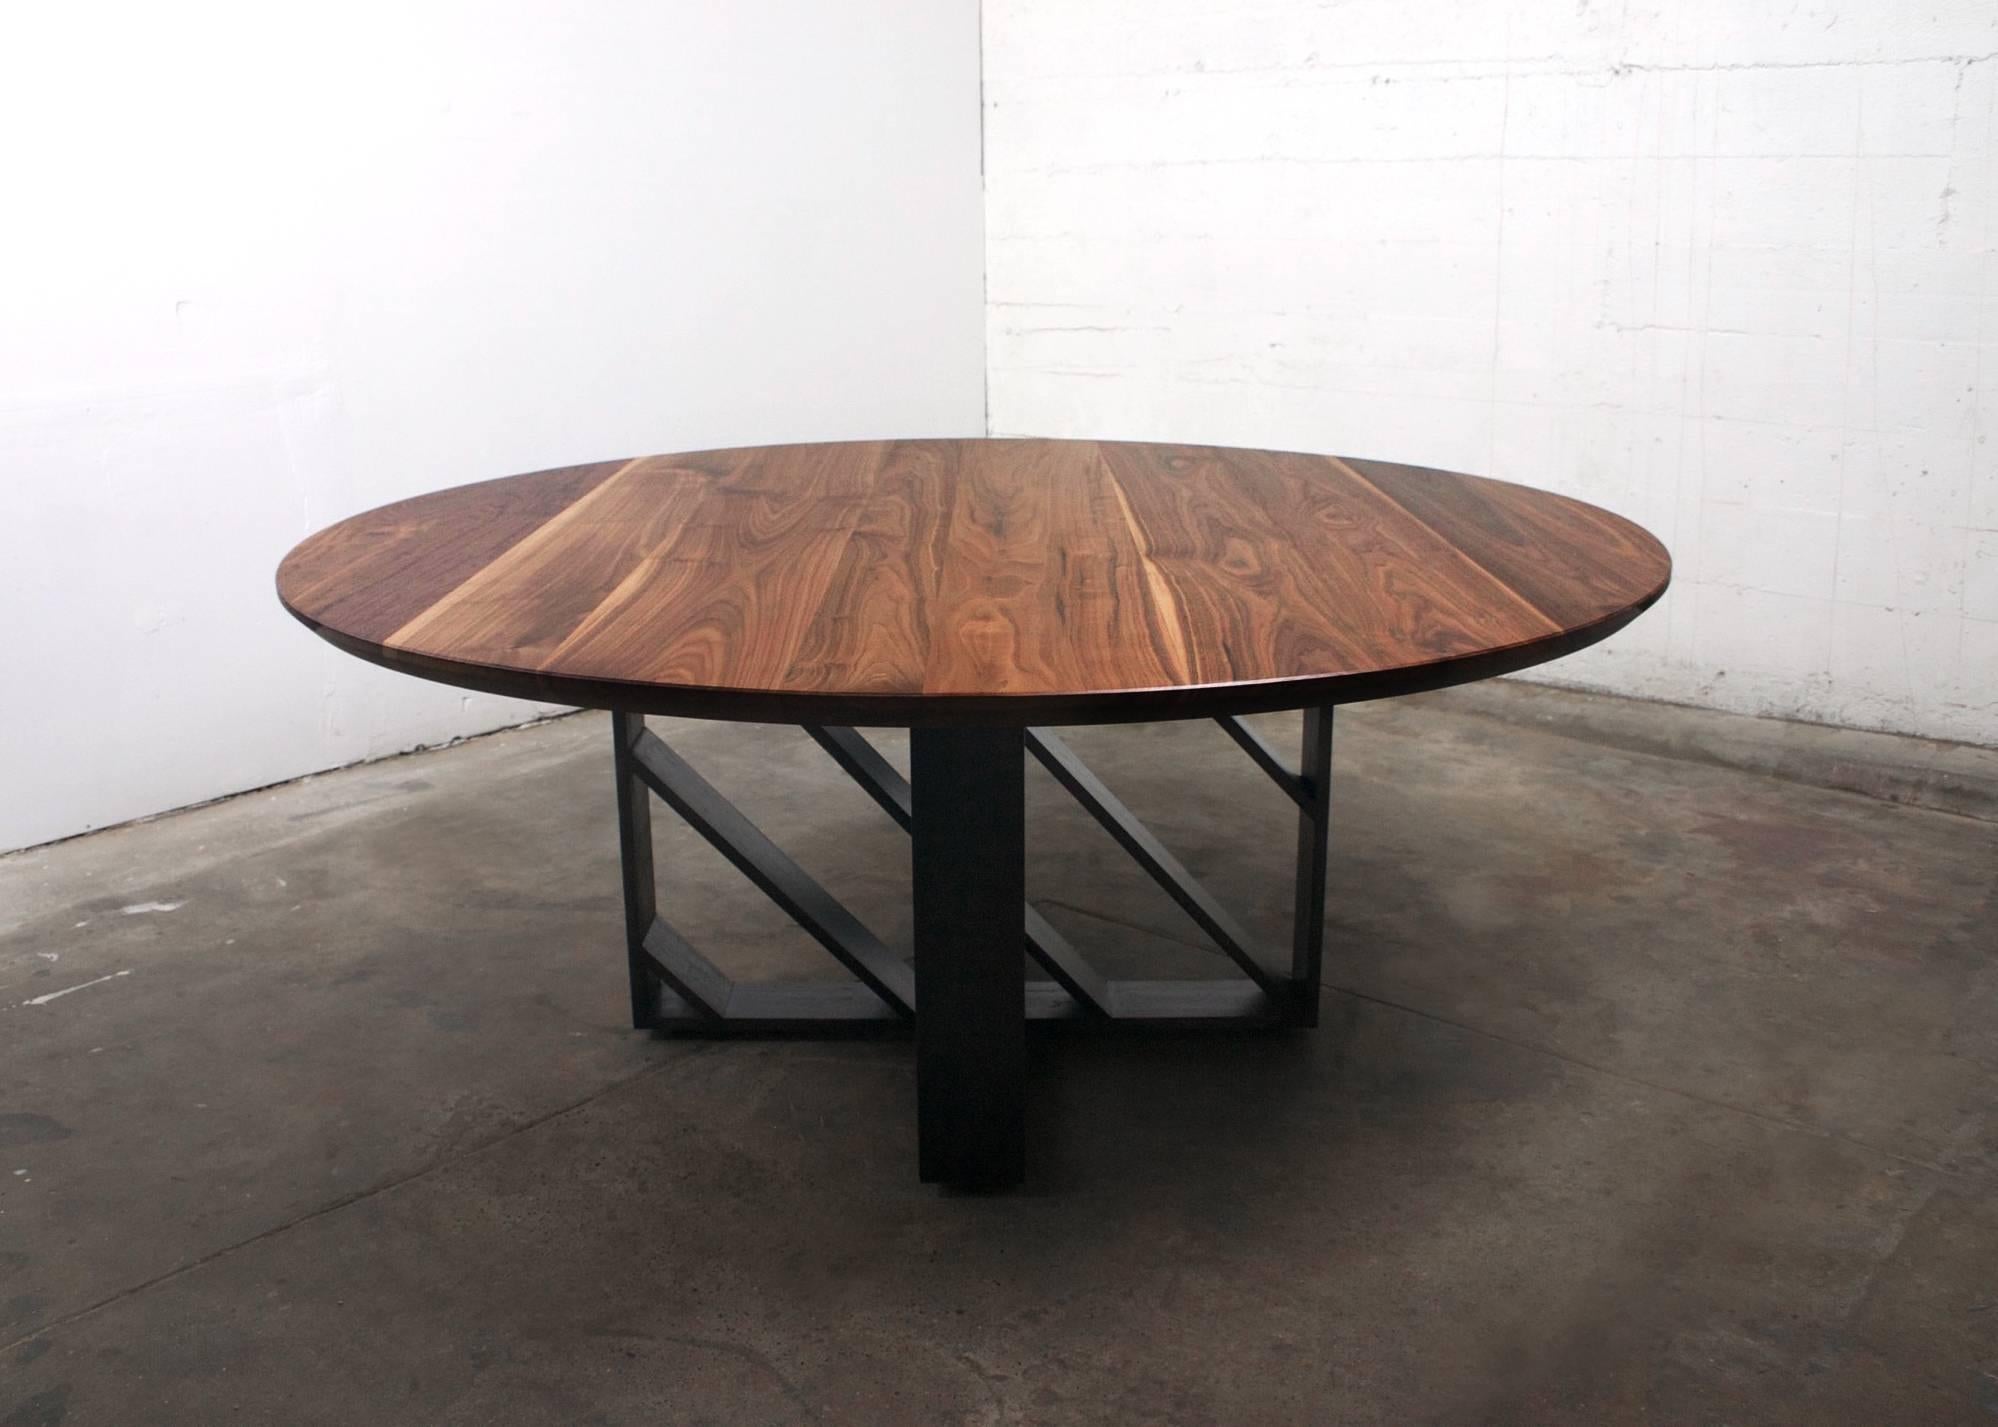 This modern steel and wood table looks different from every angle because of the steel planes movement of light and shadow. Made from American Black Walnut and 1/2” x 5” hot rolled steel plate with a live blackened finish. 

Made-to-order and fully